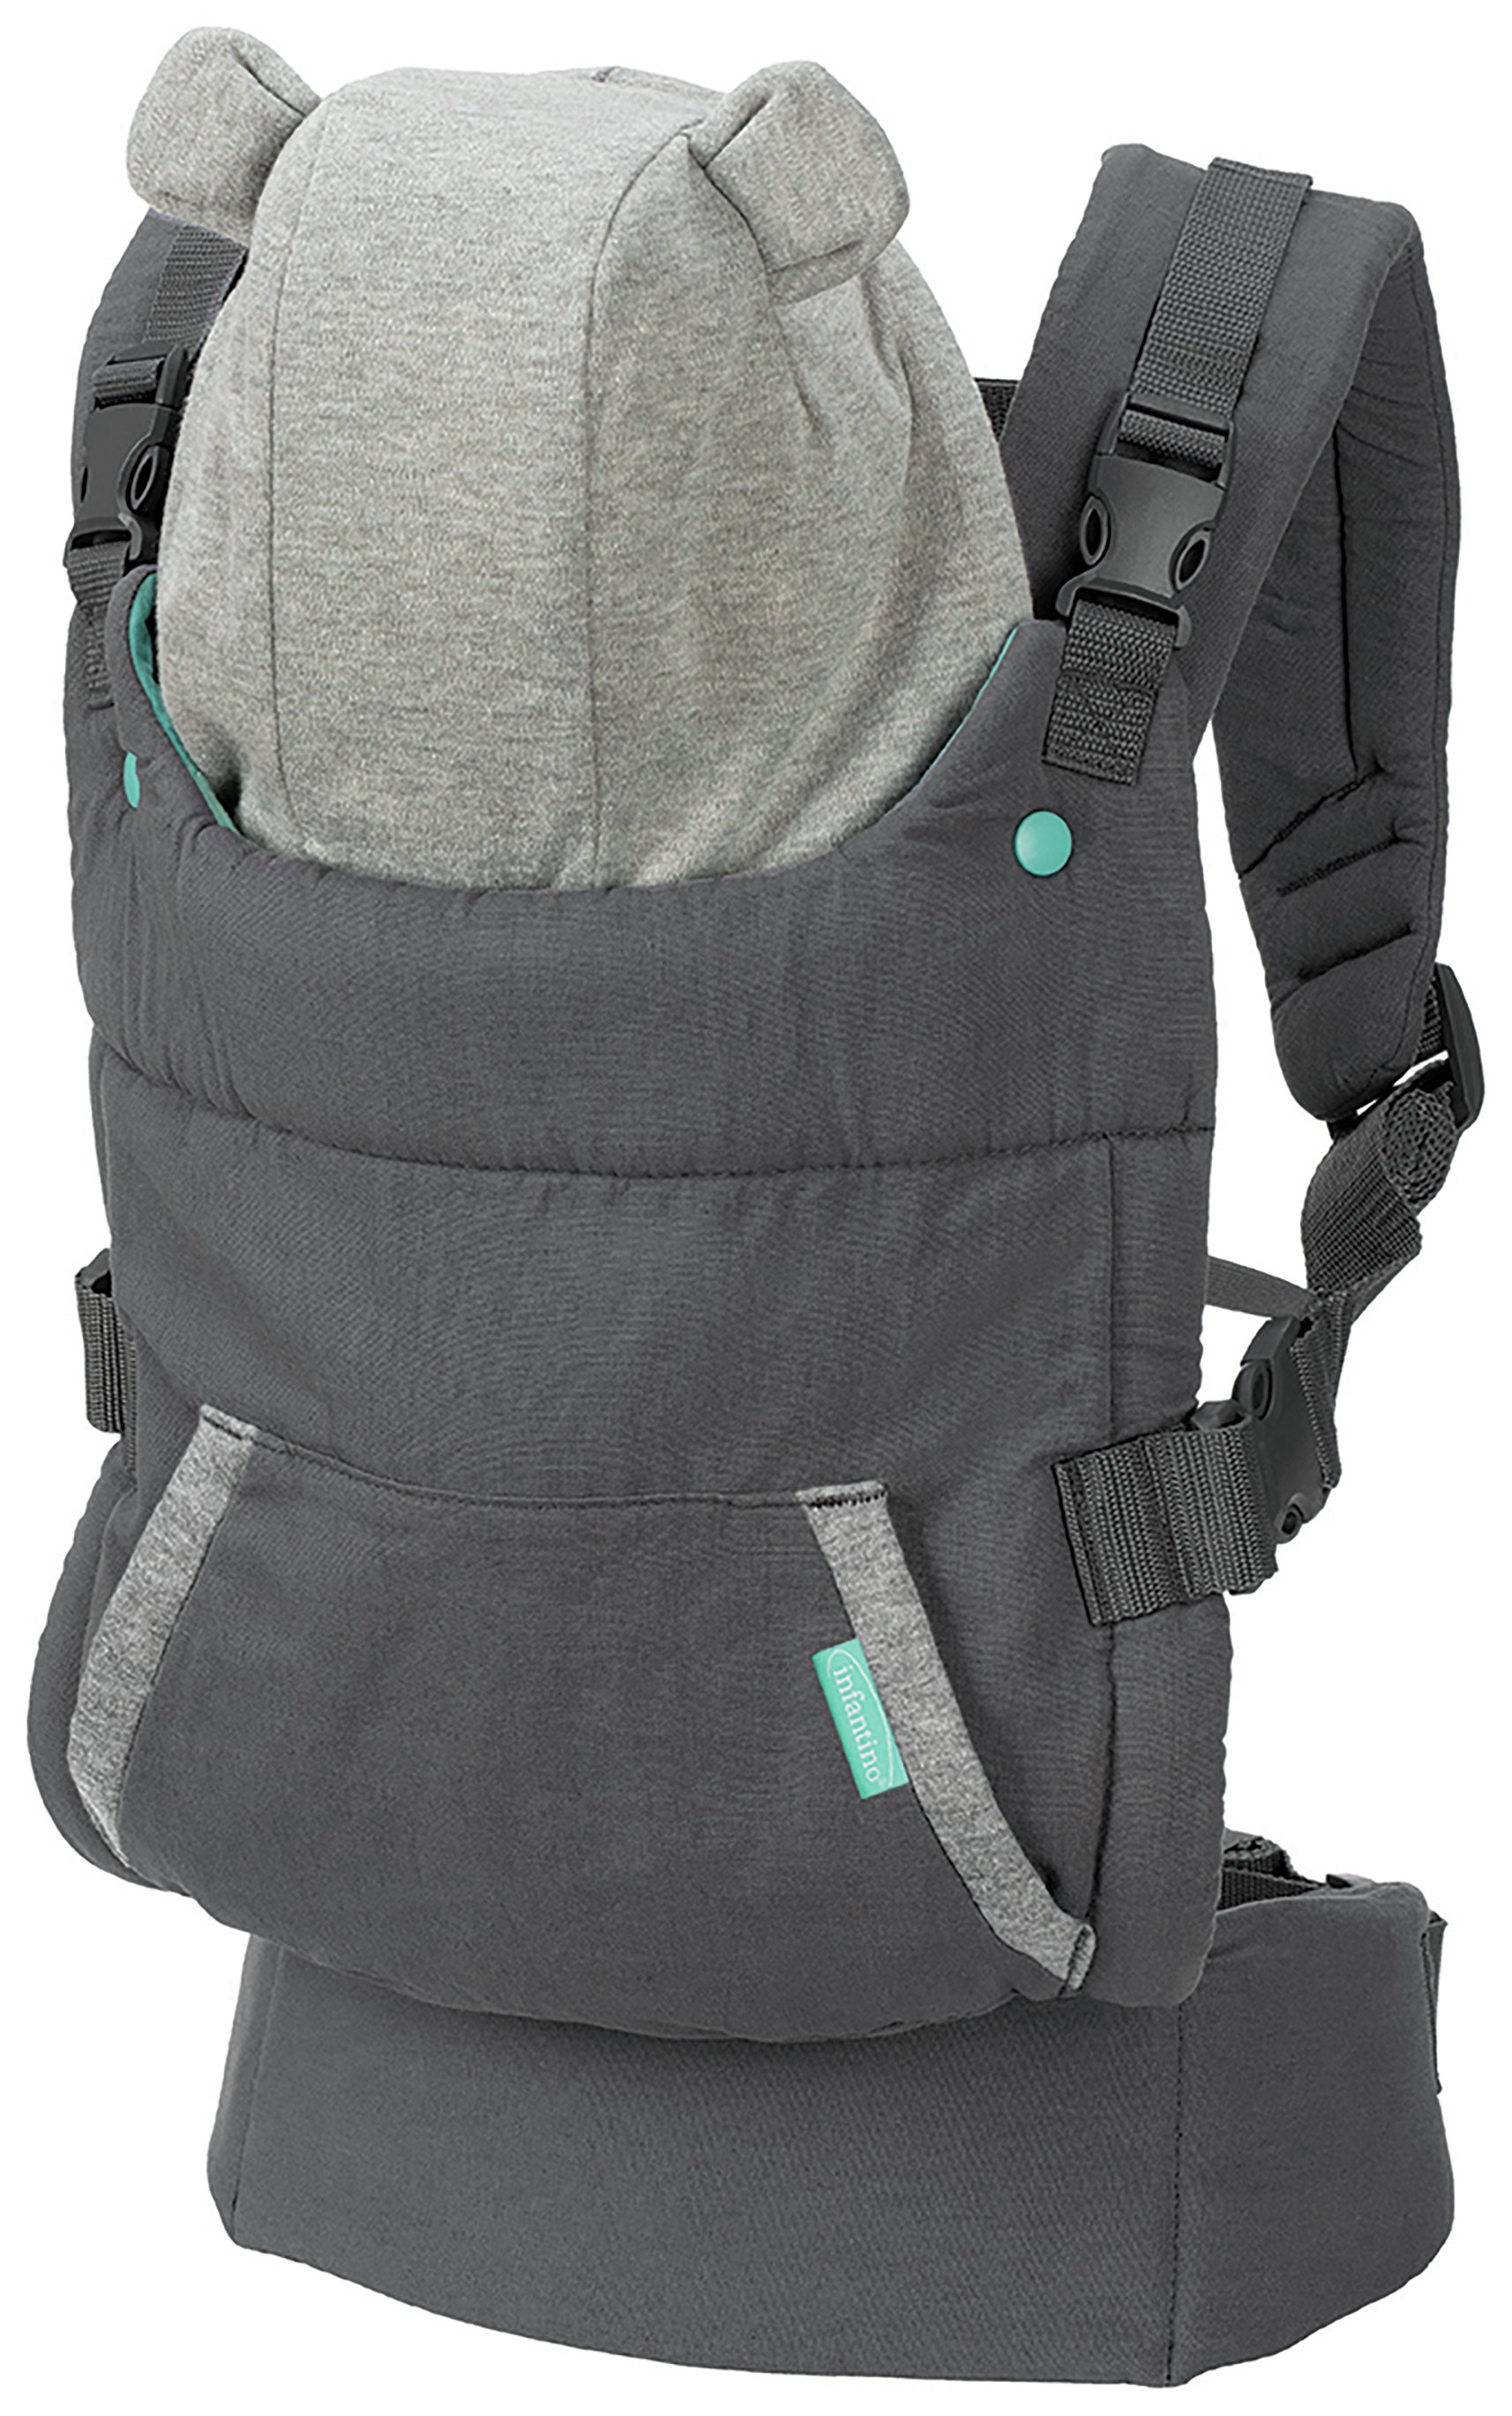 Infantino Cuddle Up Hoodie Carrier Review